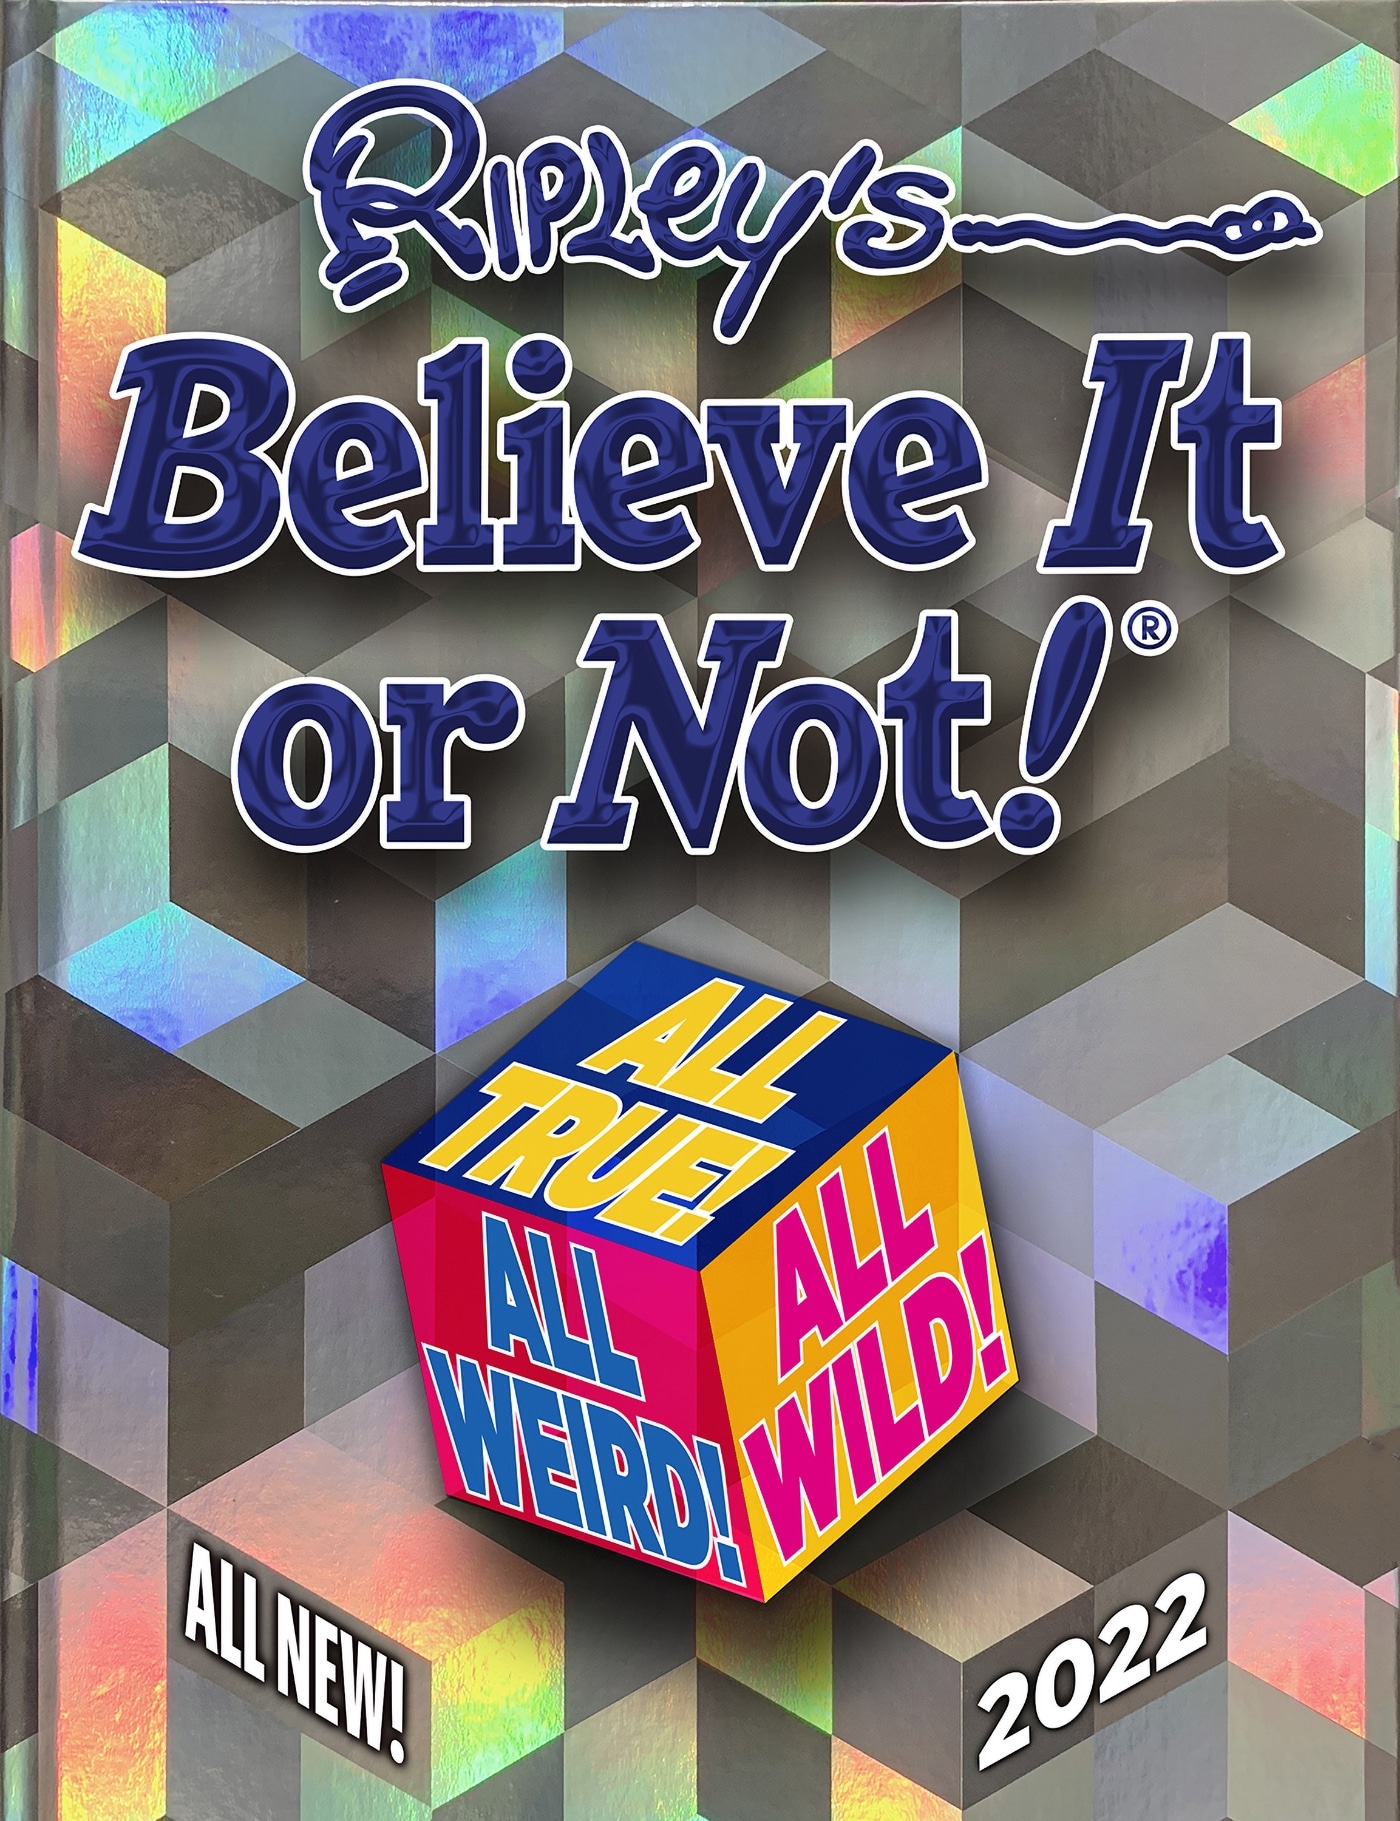 Book “Ripley’s Believe It or Not! 2022” by Ripley — October 14, 2021